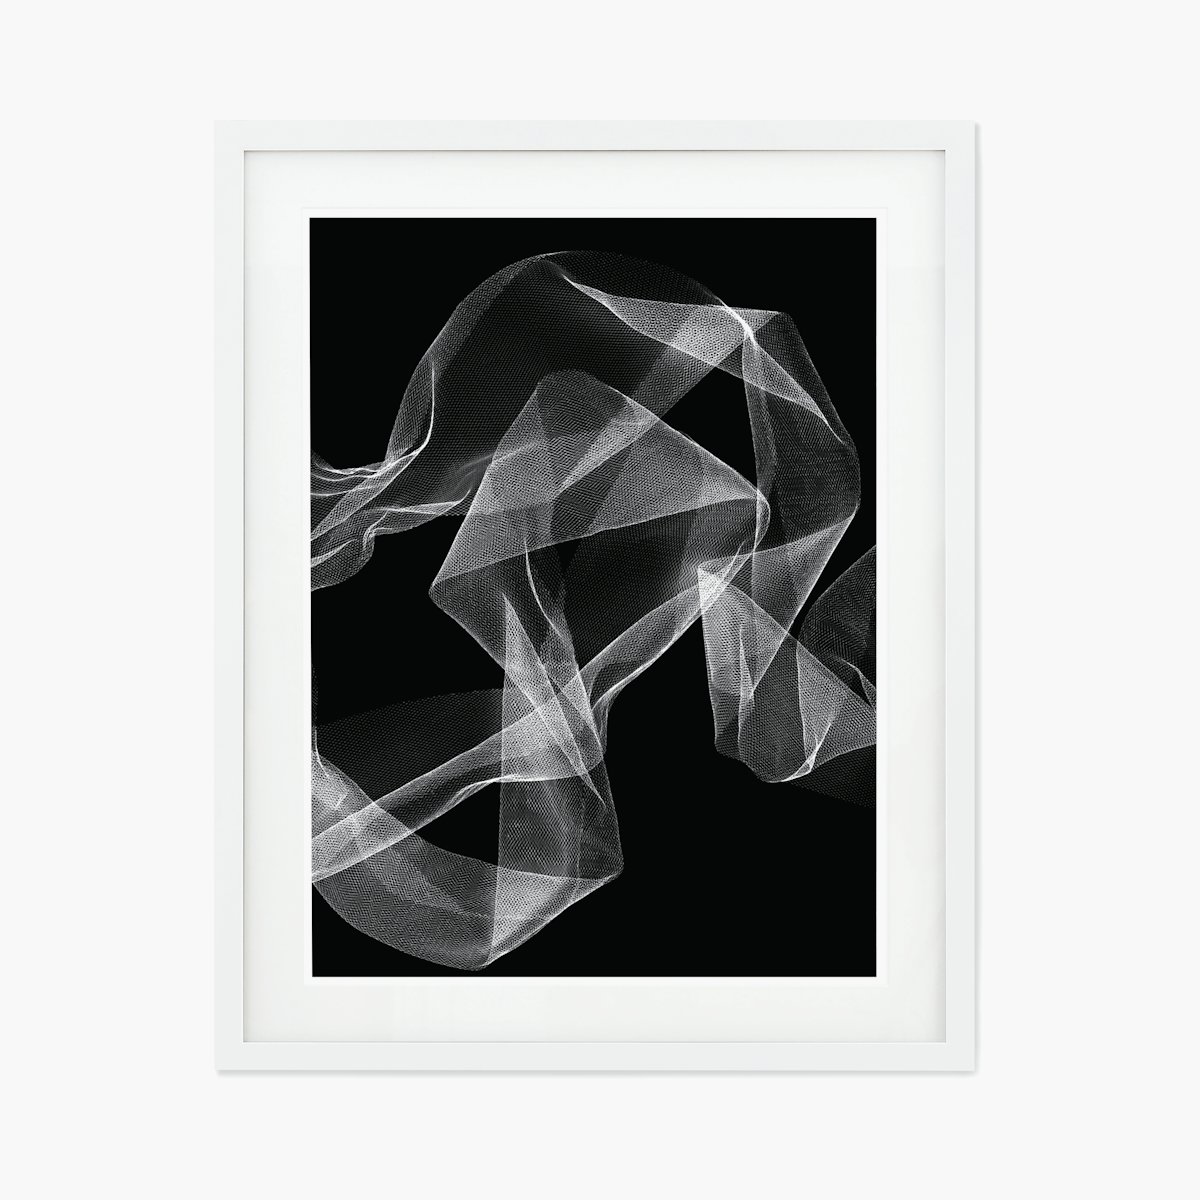 “Illusion” by Permanent Press Editions, Edition 3